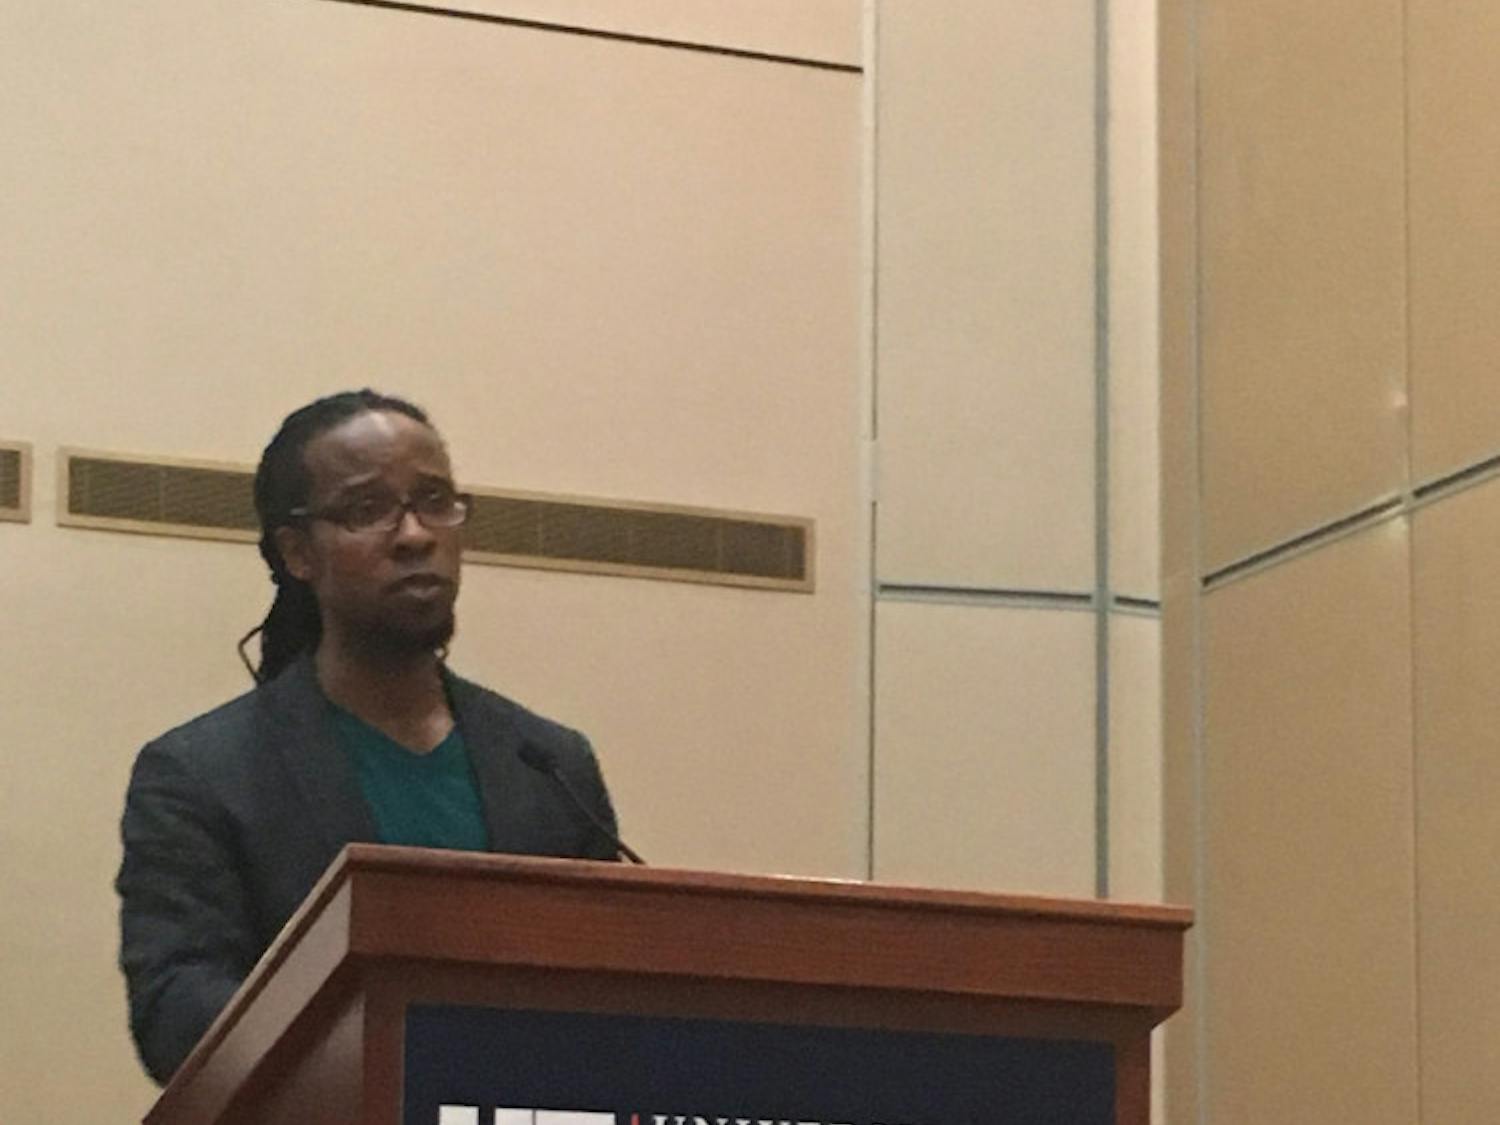 Ibram Kendi, a UF African-American history professor, spoke on Tuesday about racial tensions in the U.S. The event was part of the MLK Day celebration.